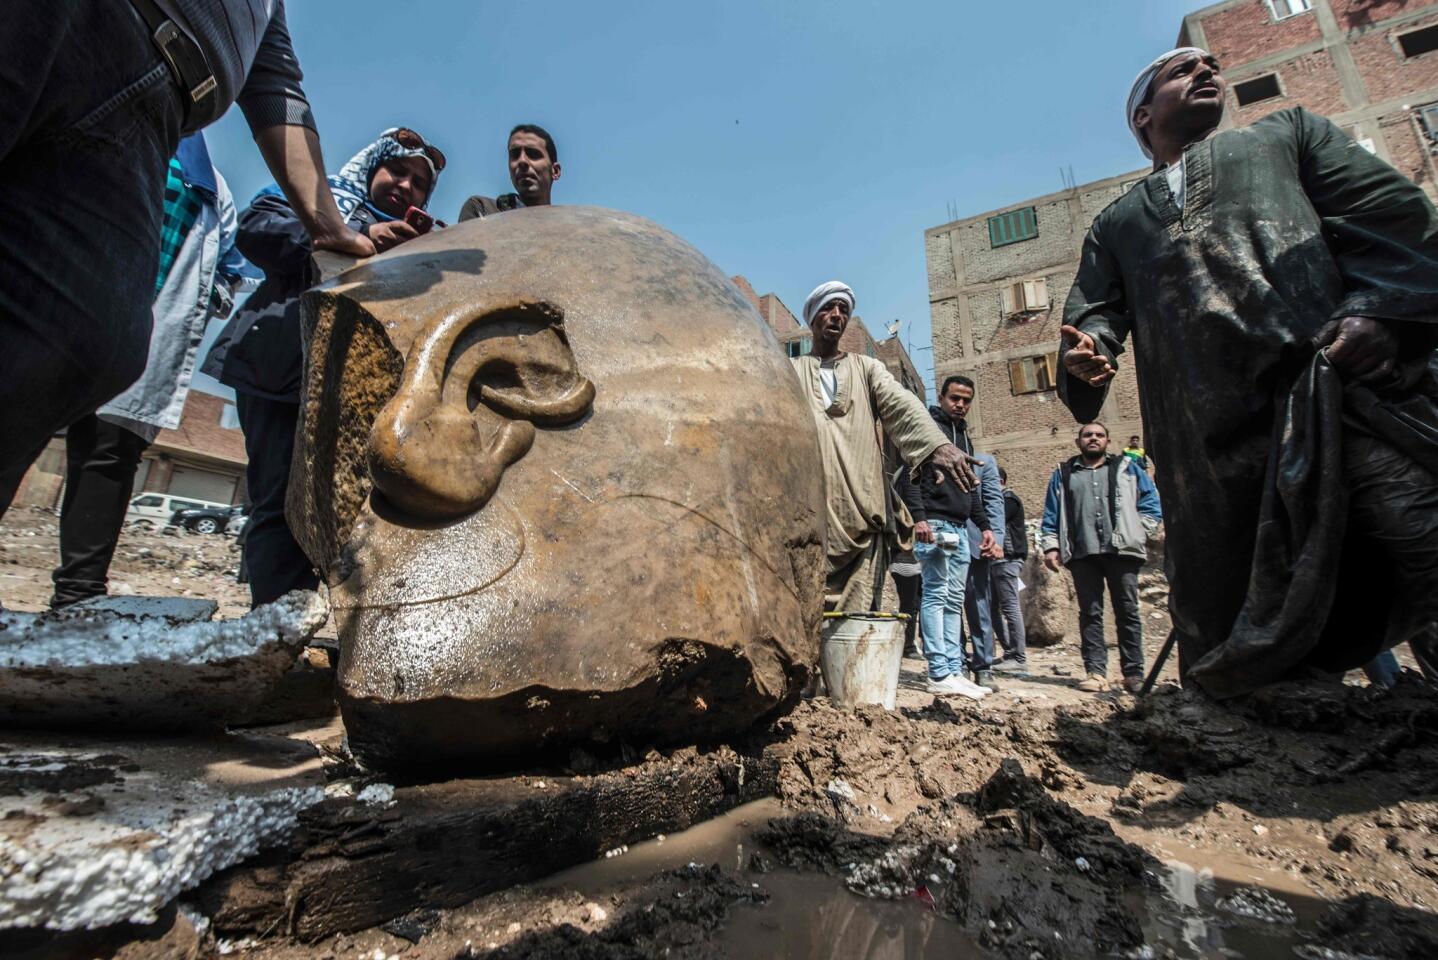 Egyptian workers look at the site of a discovery by a team of German-Egyptian archaeologists in Cairo's Mattarya district. Statues of the kings and queens of the 19th dynasty (1295-1185 B.C.) were unearthed in the vicinity of the Temple of Ramses II in what was the old pharonic city.